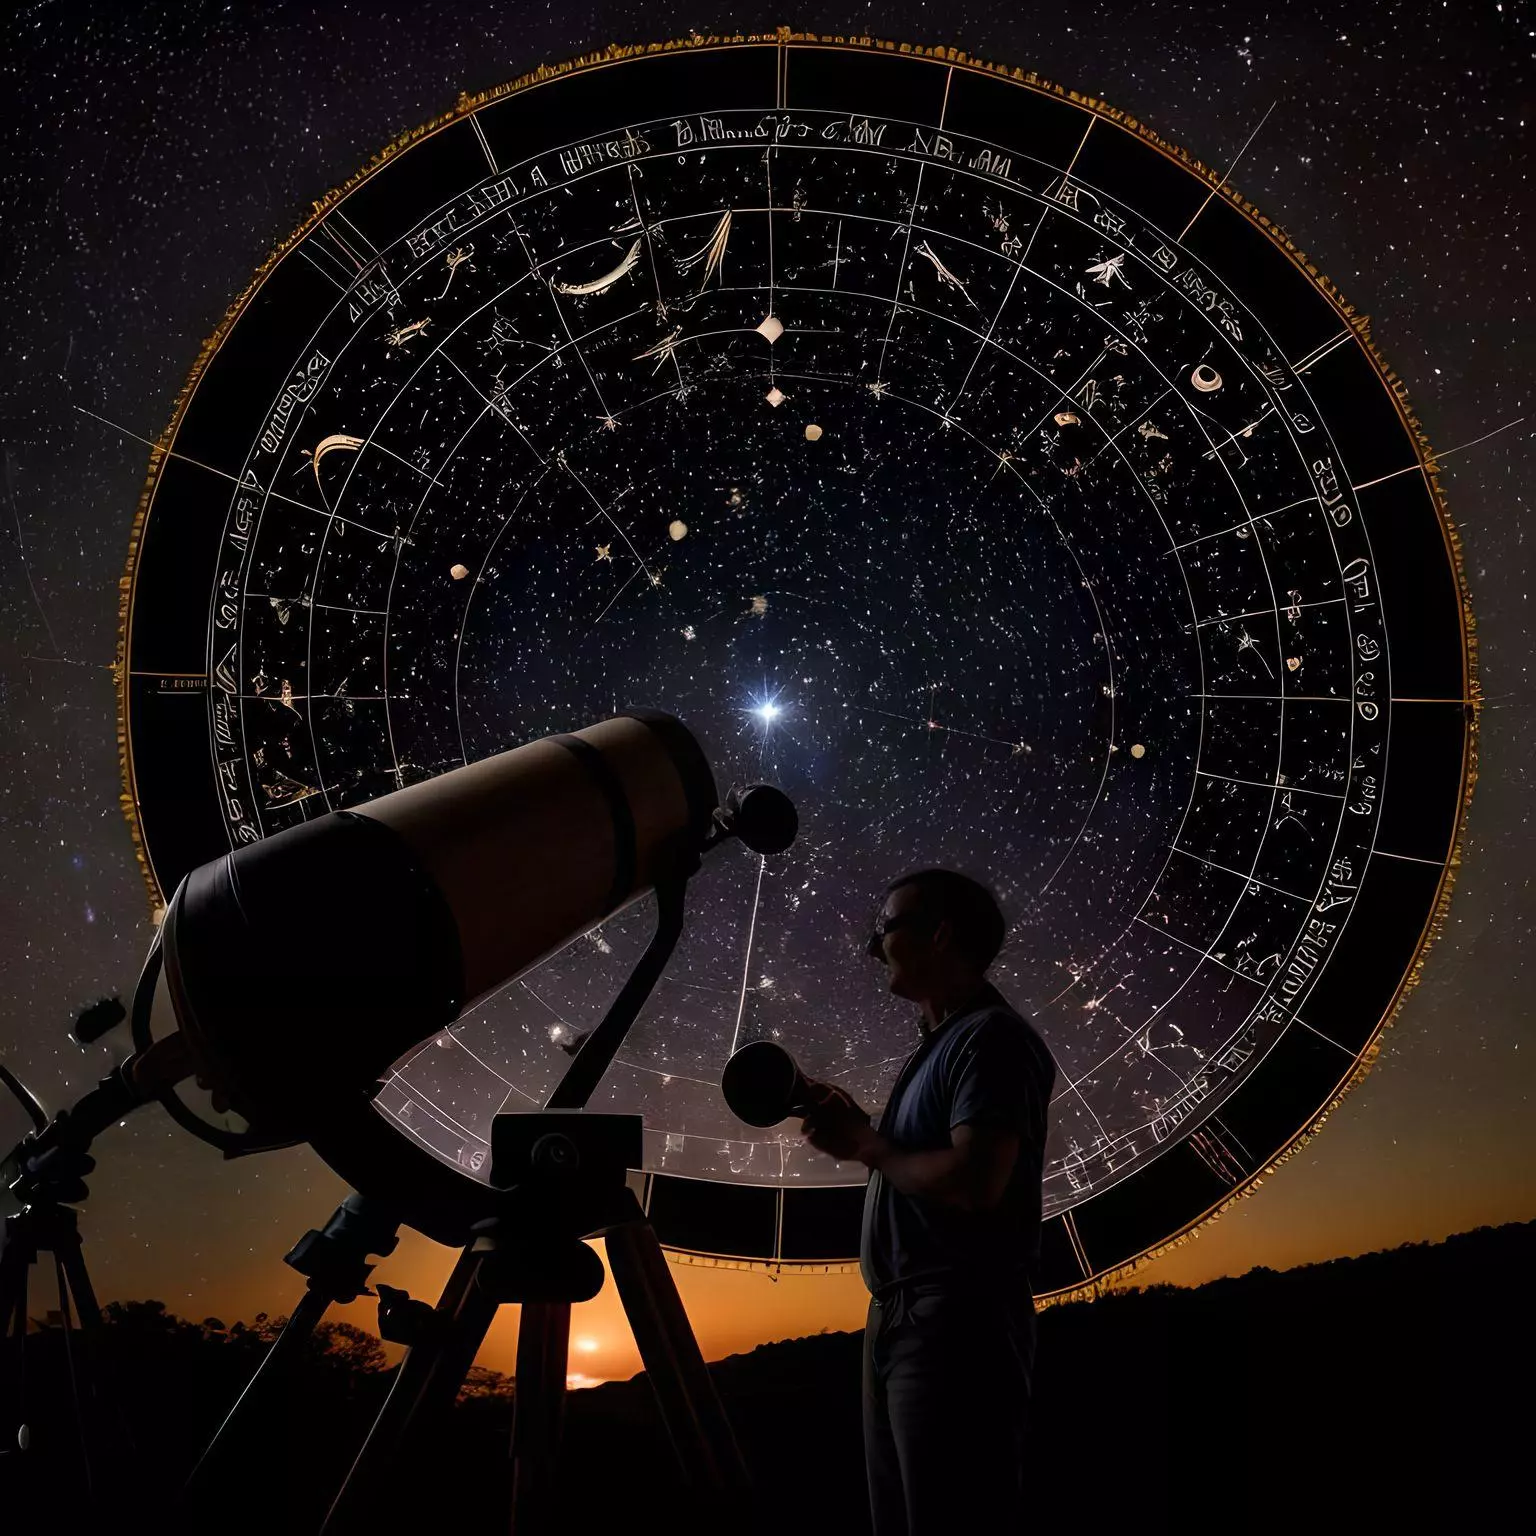 An astrologer examining the night sky. Understanding why is it called horoscopes?